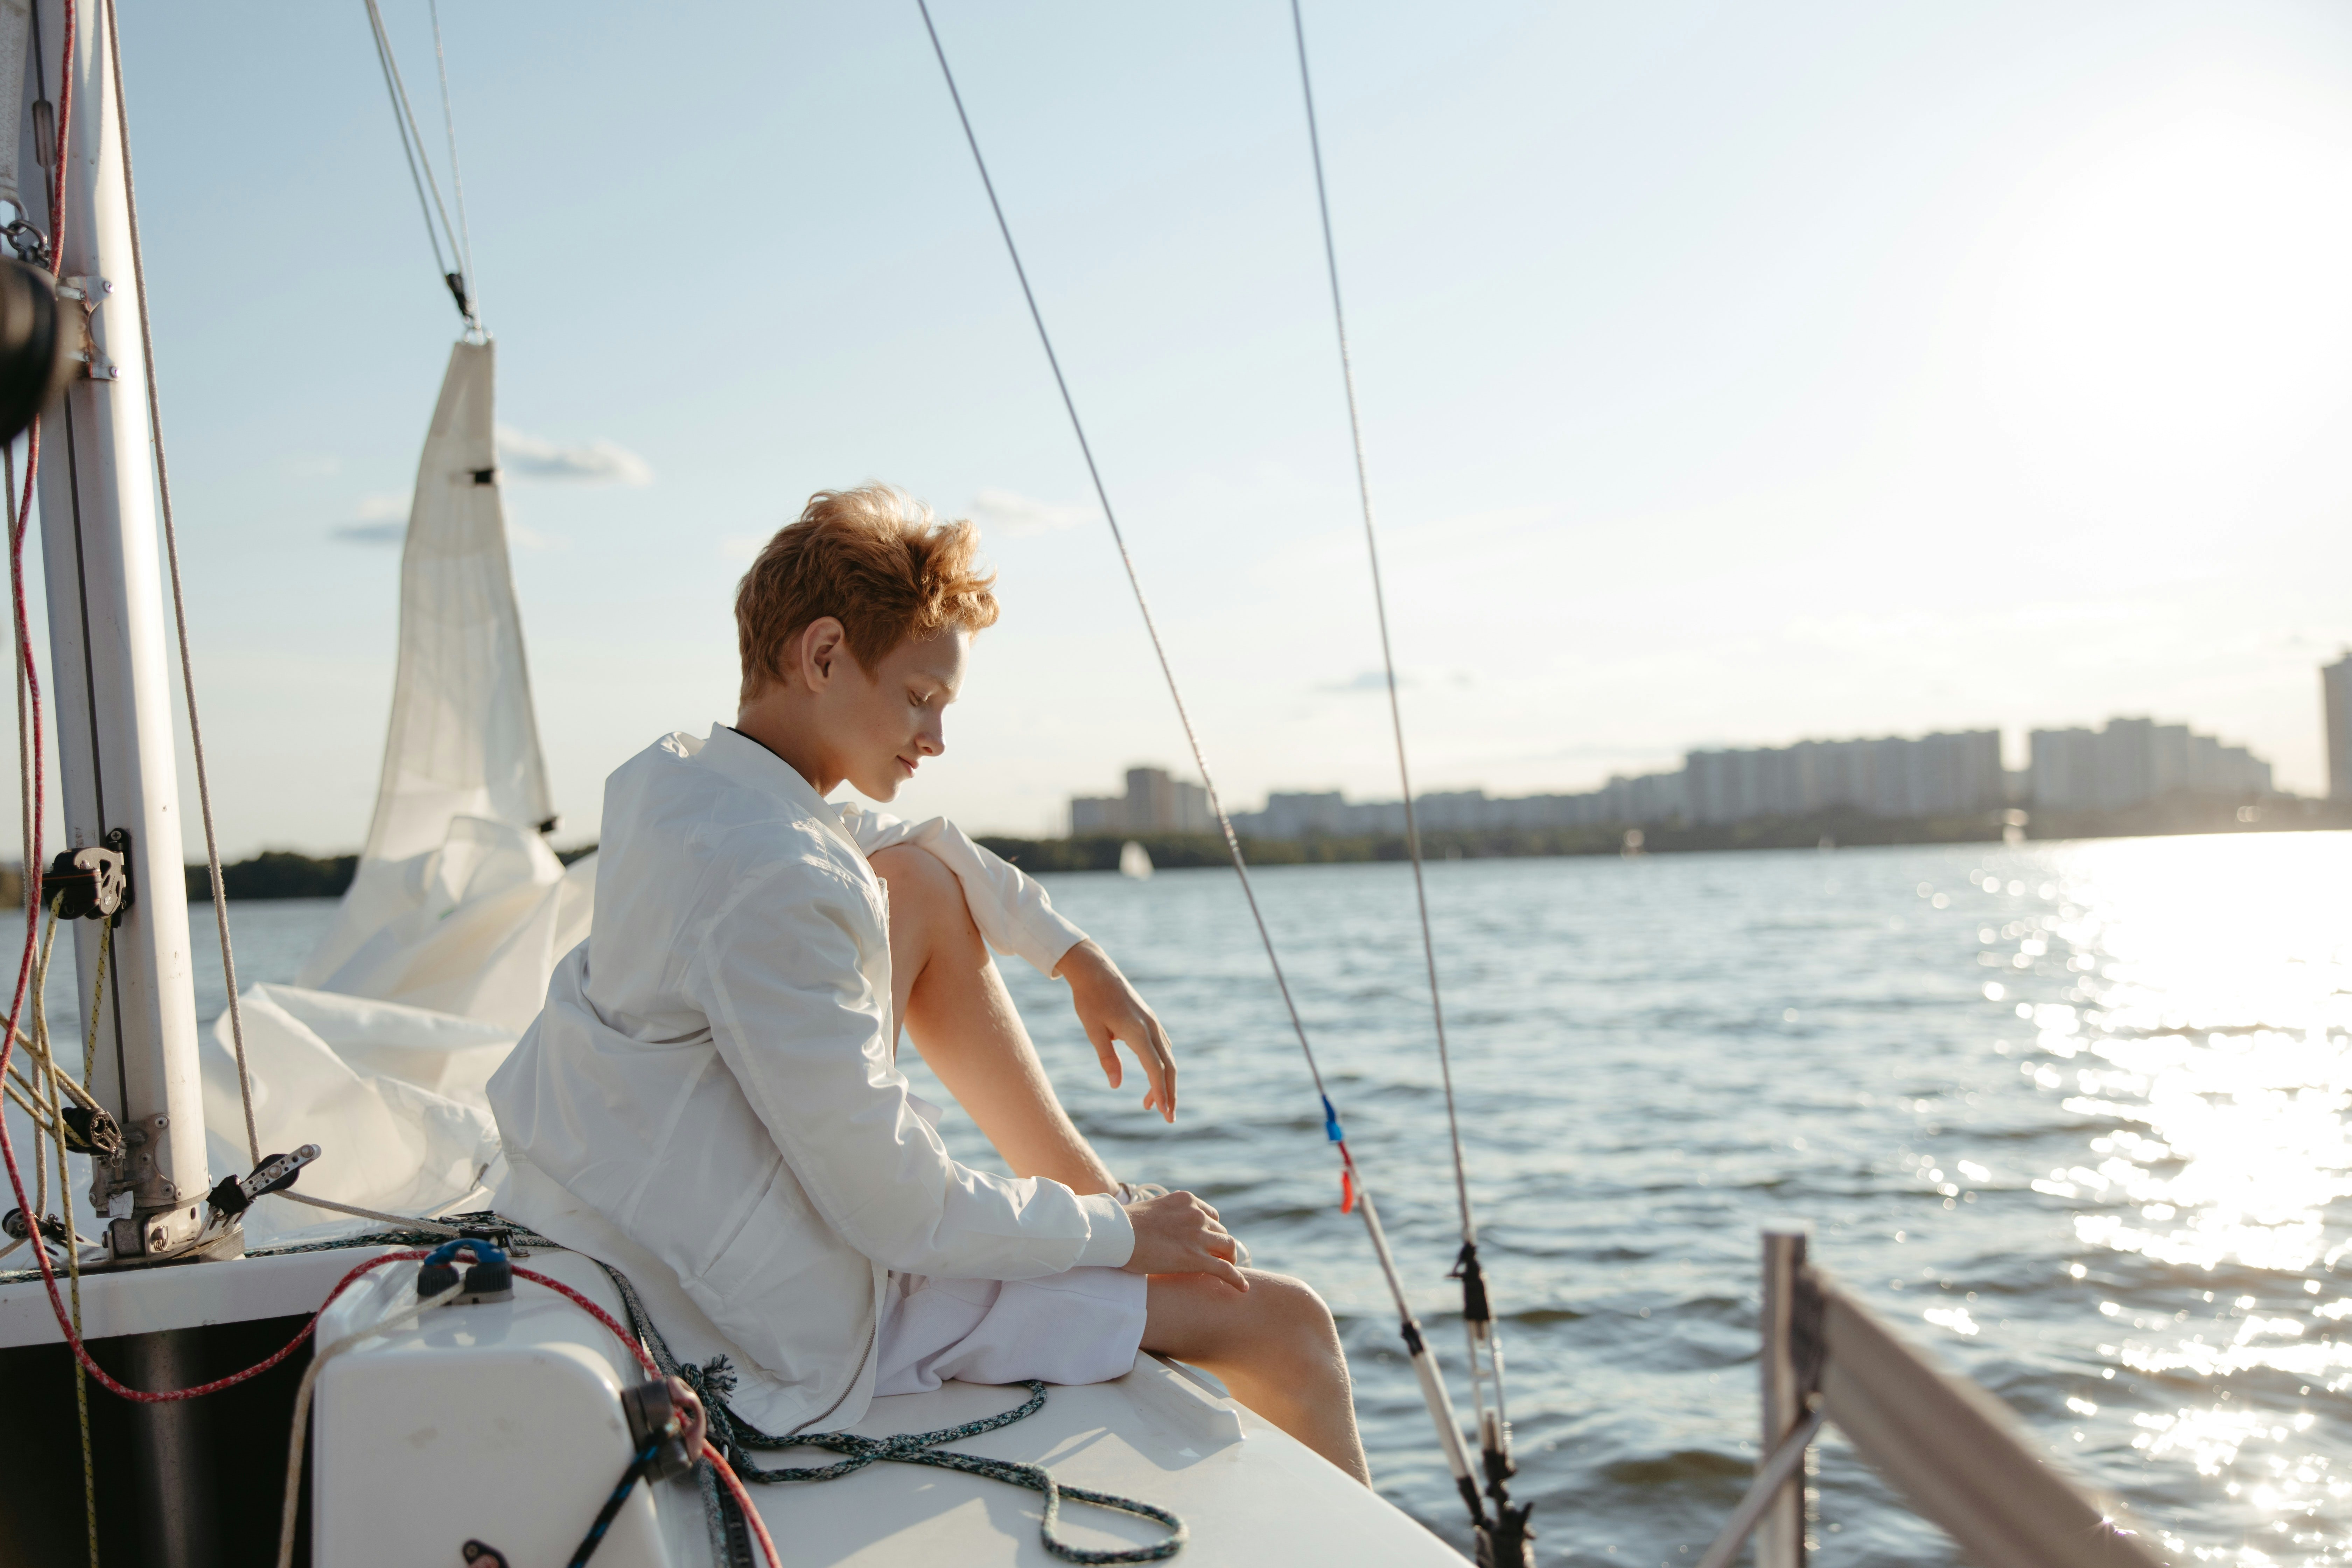 A lady or lady sitting on the bow of the boat in a white shirt and wind